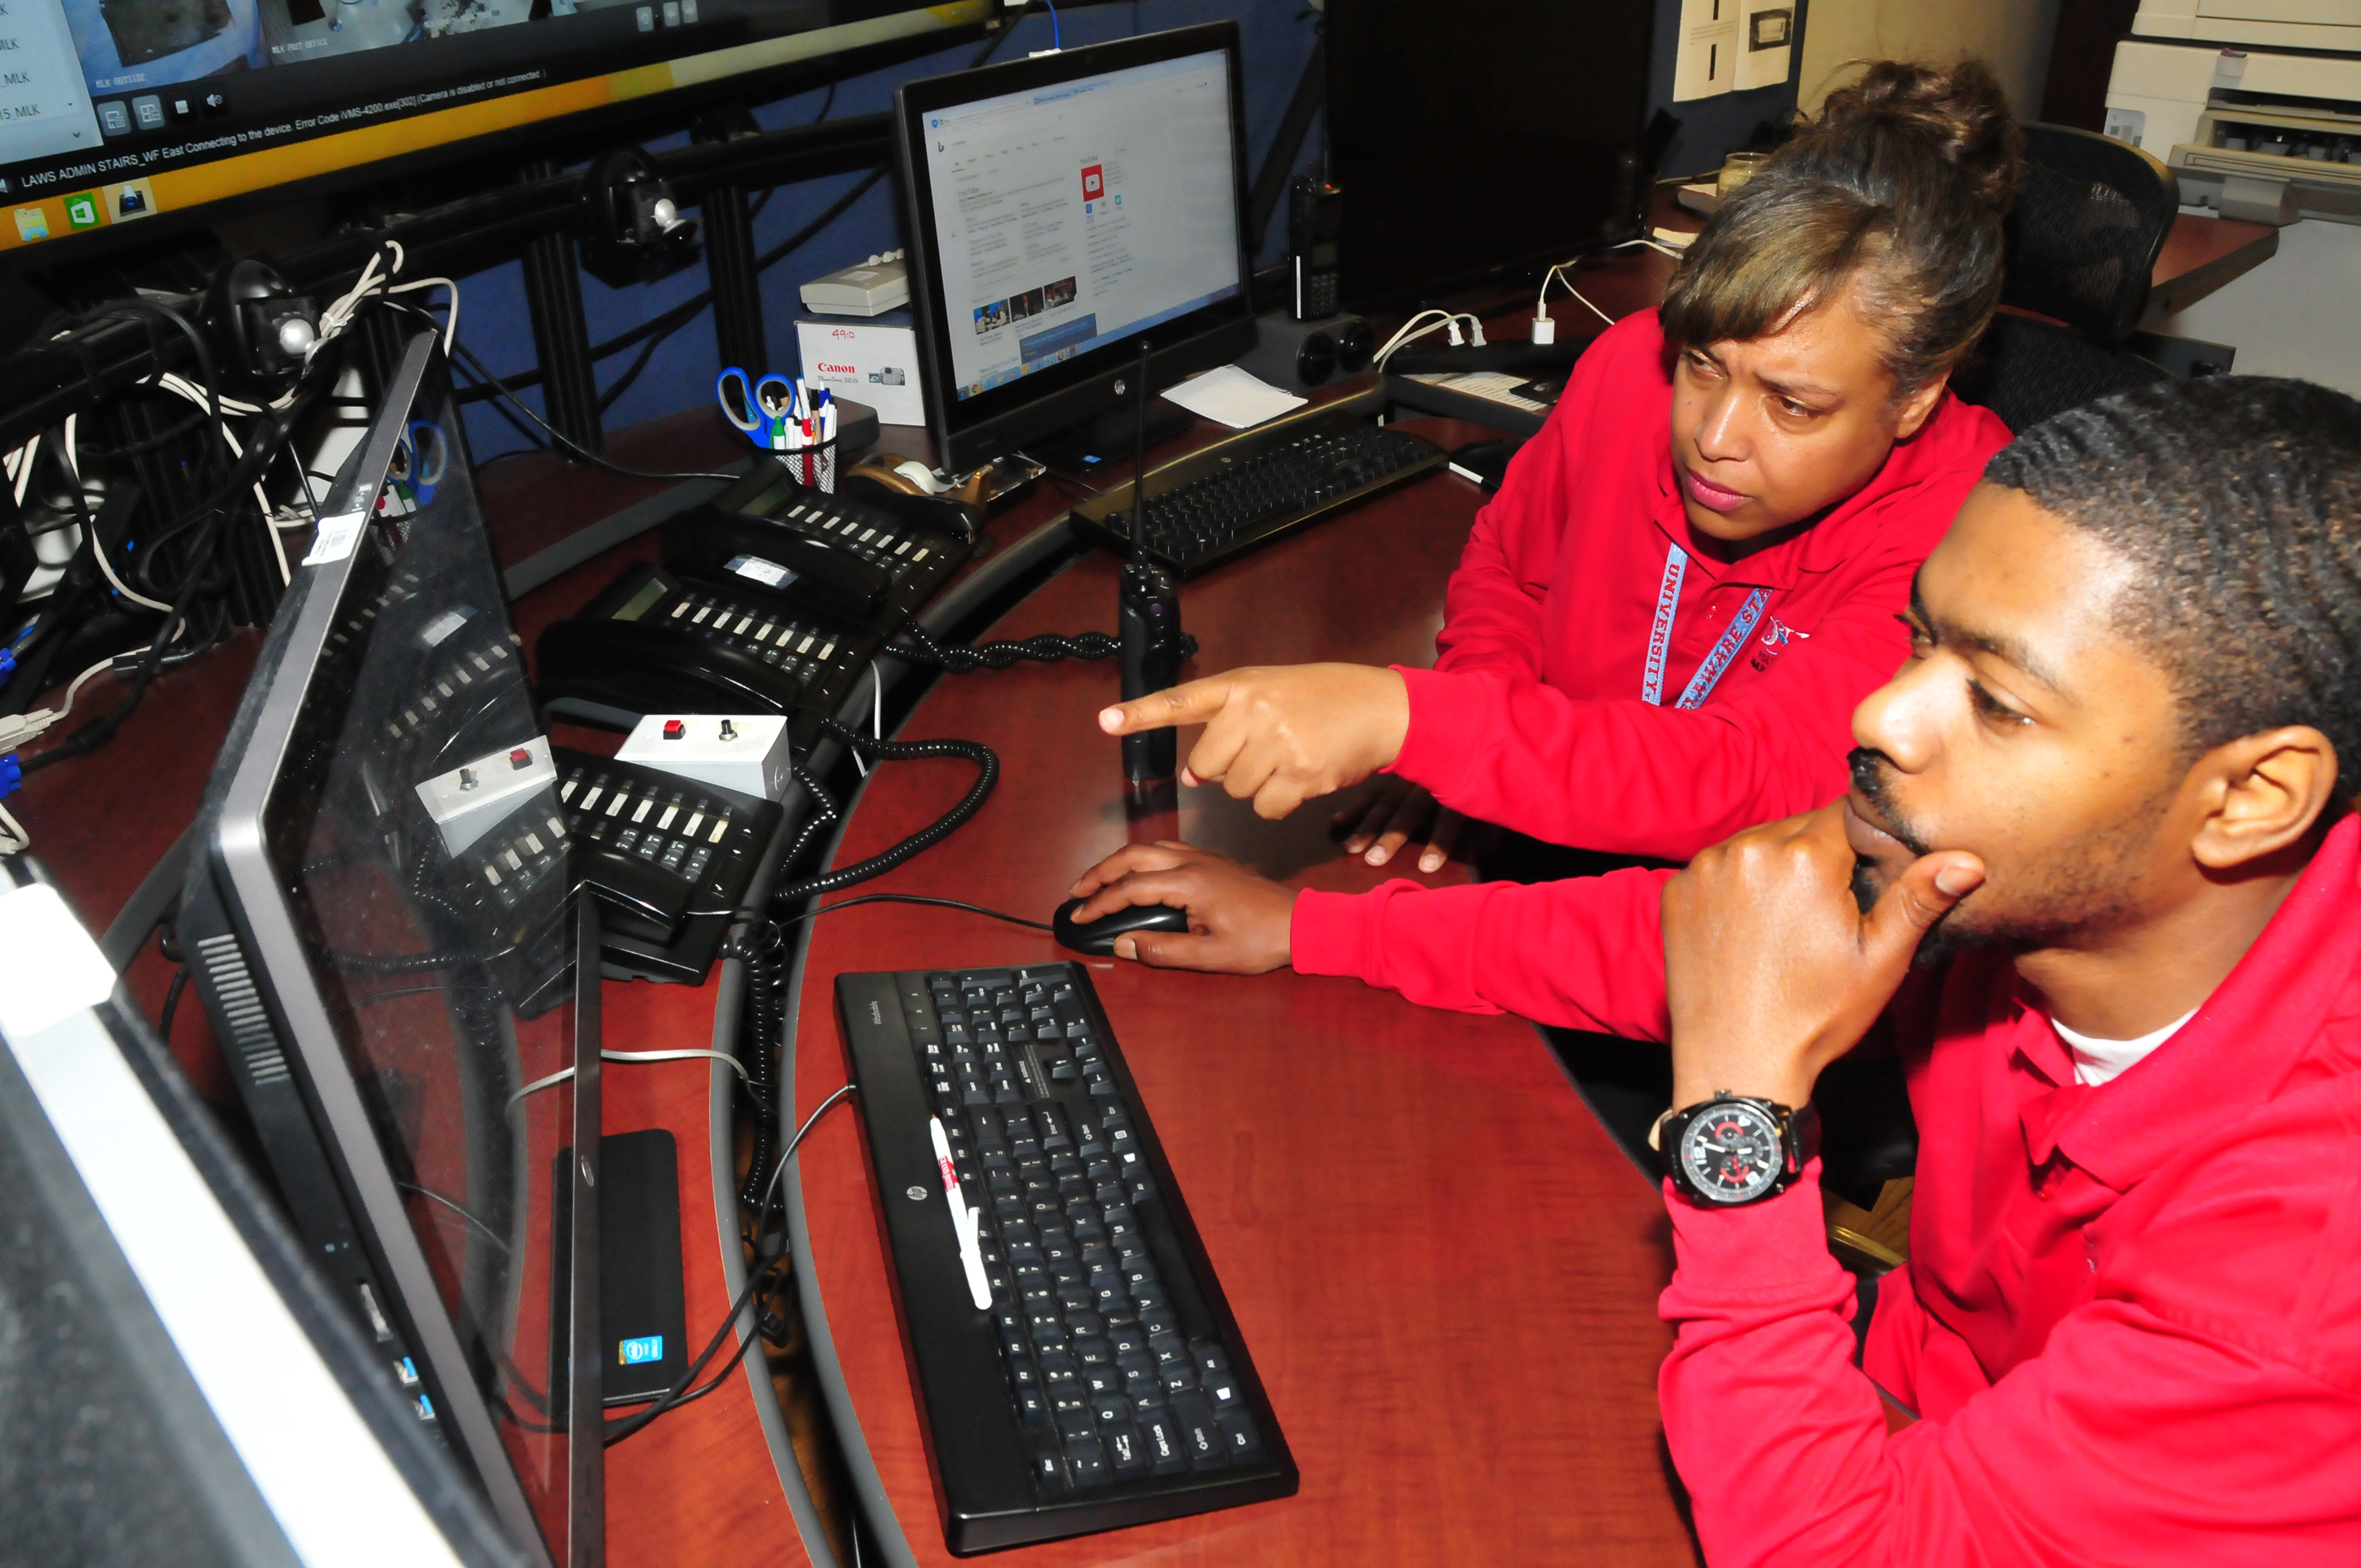 DSU Police dispatchers Kimberley Wood and James Paige Jr. were among the dispatchers who were tested during the April 11 active shooter exercise on campus.